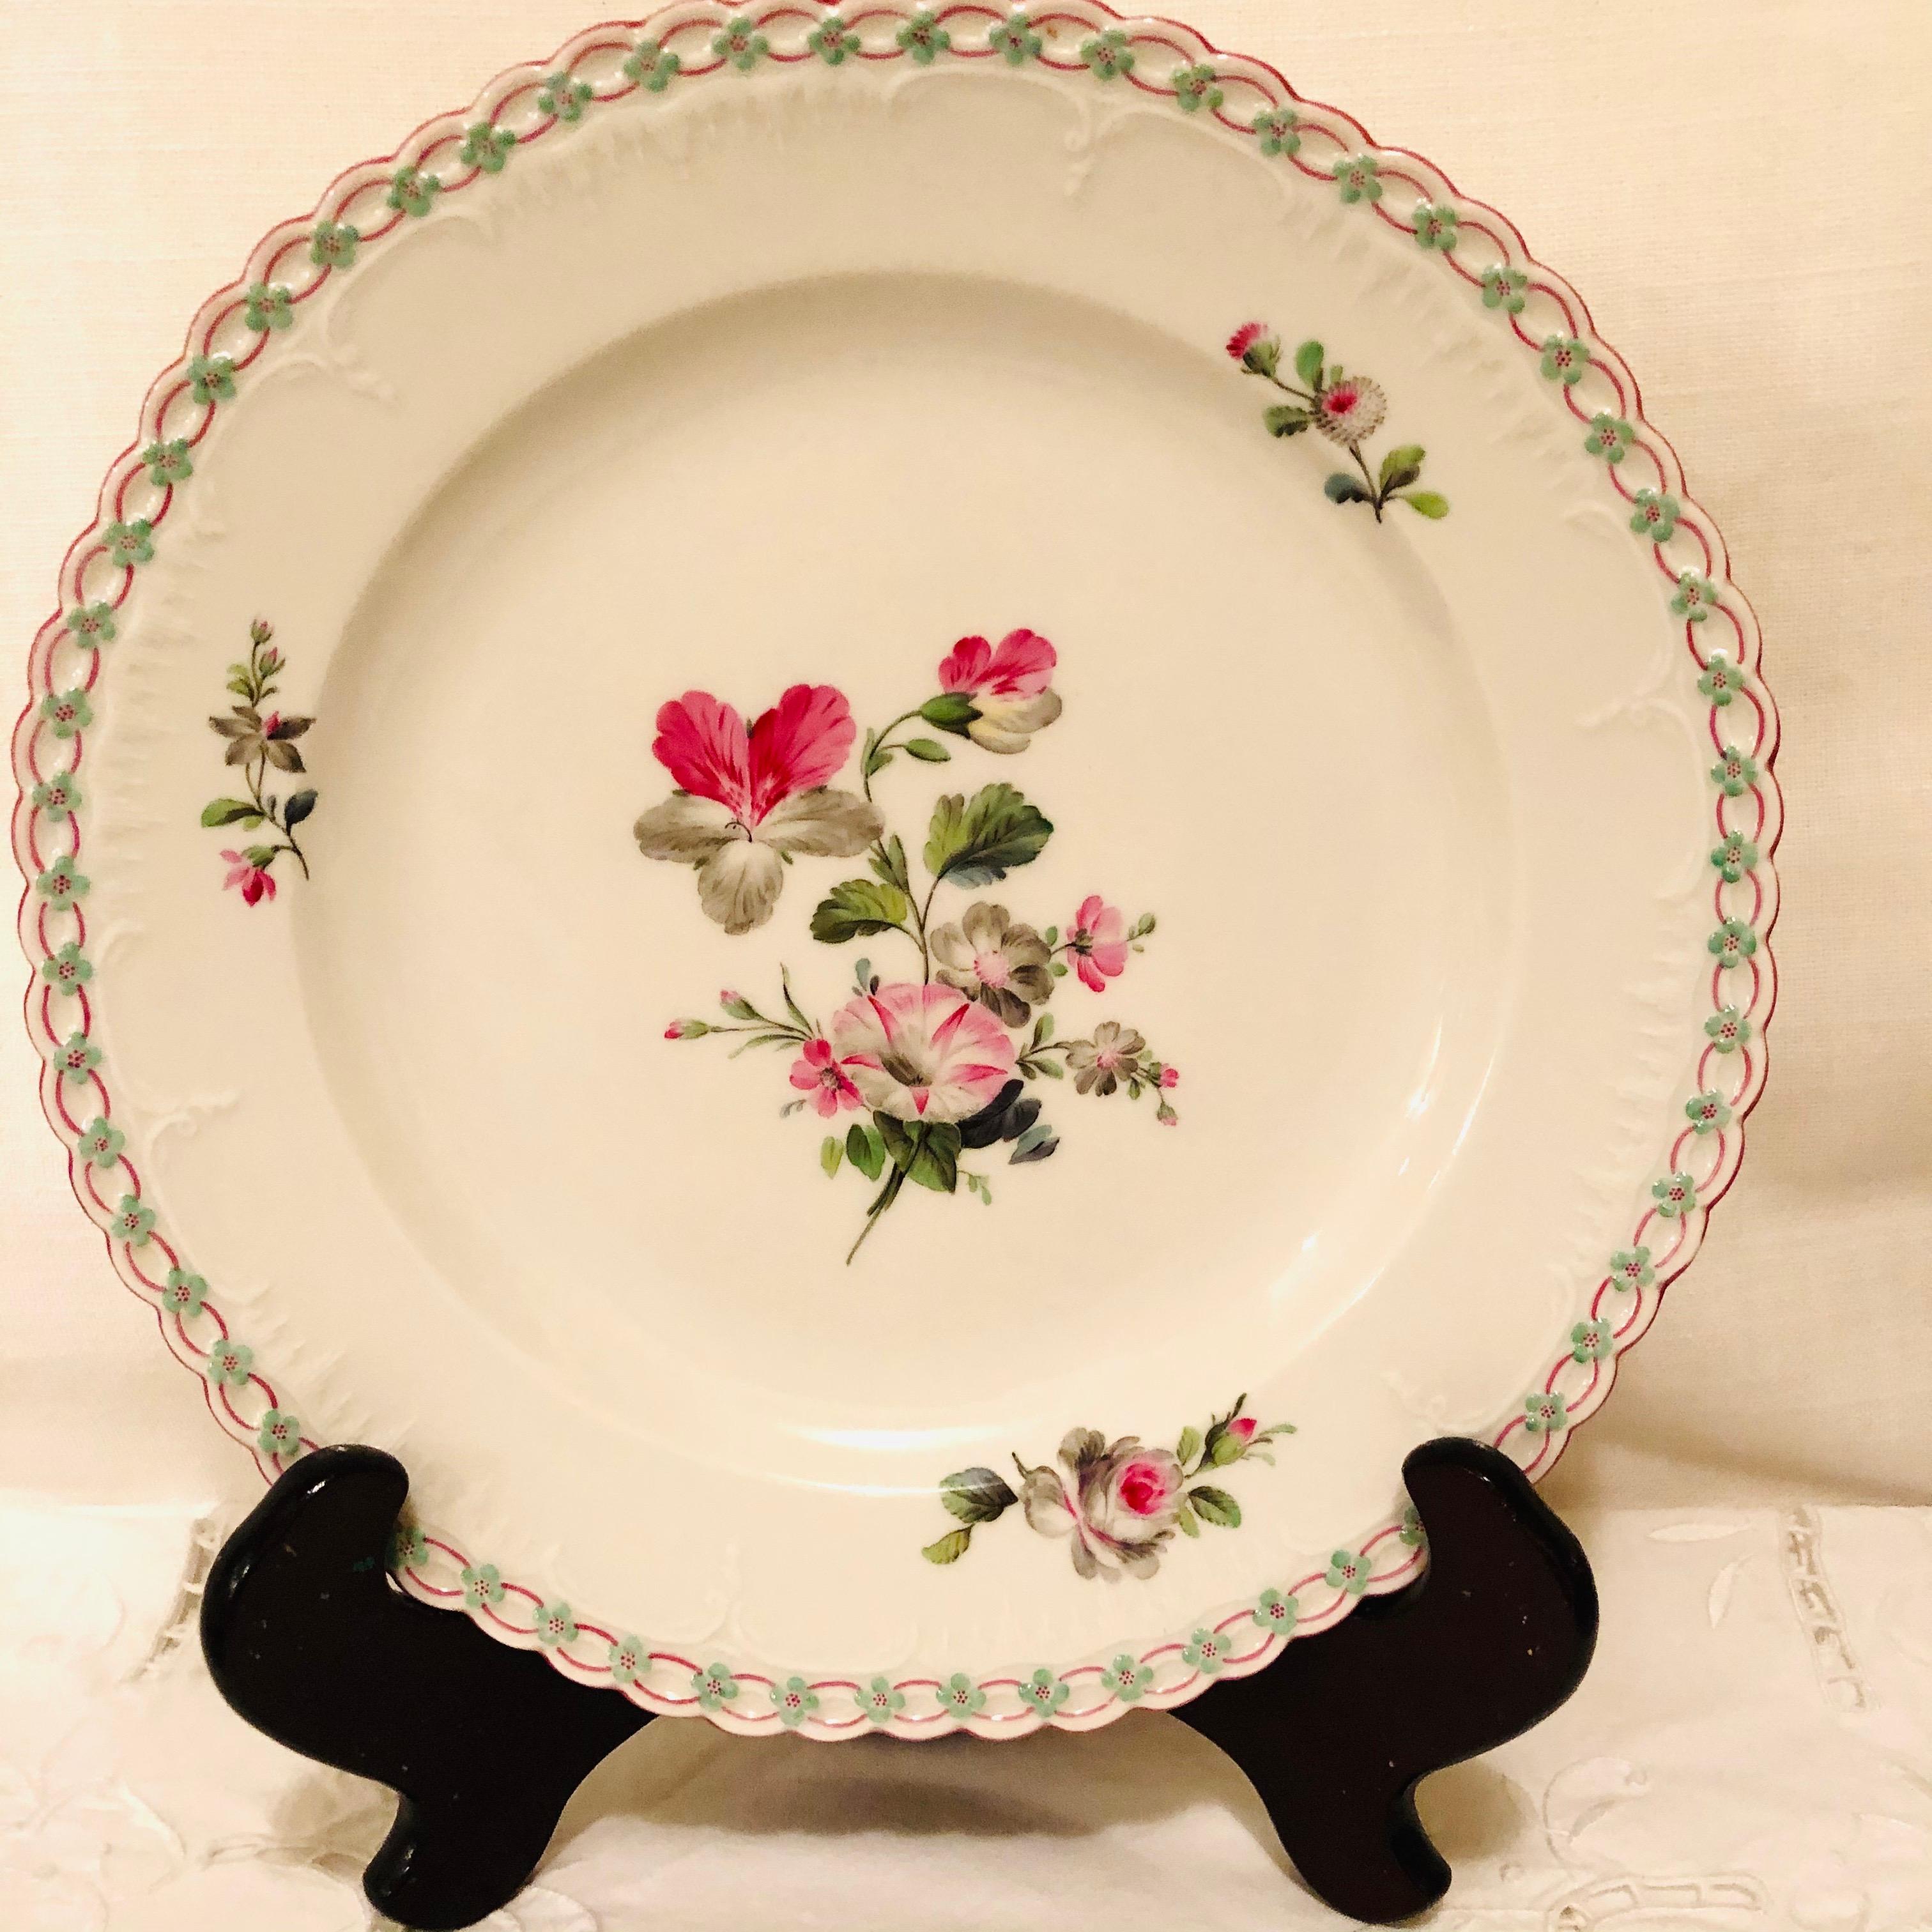 Hand-Painted Set of 13 KPM Dinner Plates Each Painted Differently With Raised Forget Me Nots